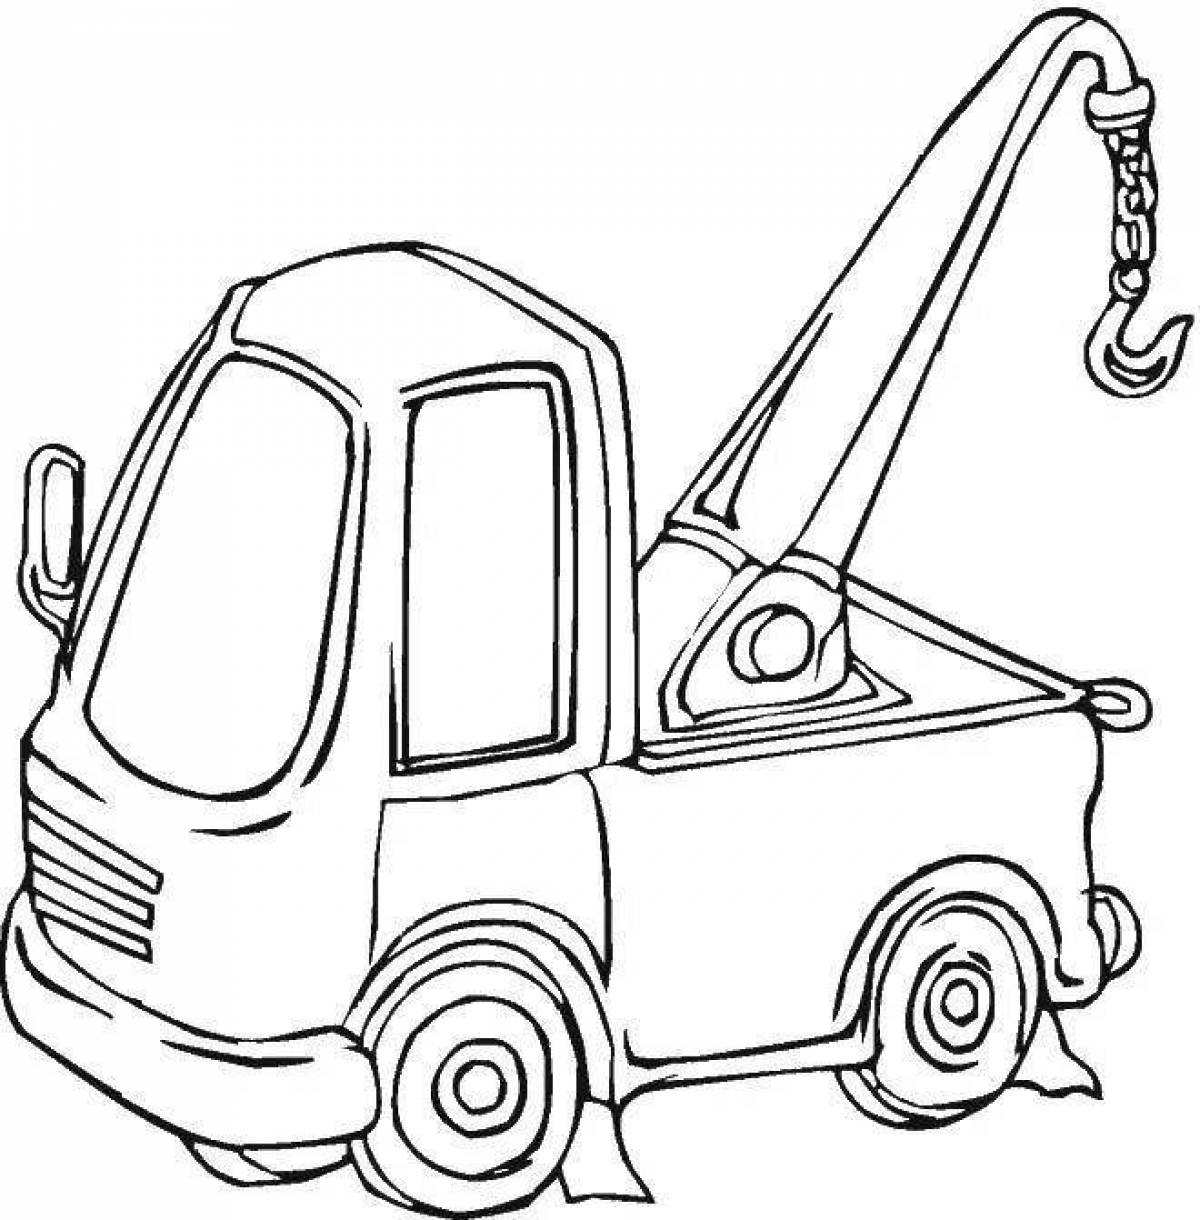 Coloring page of the charming left tow truck